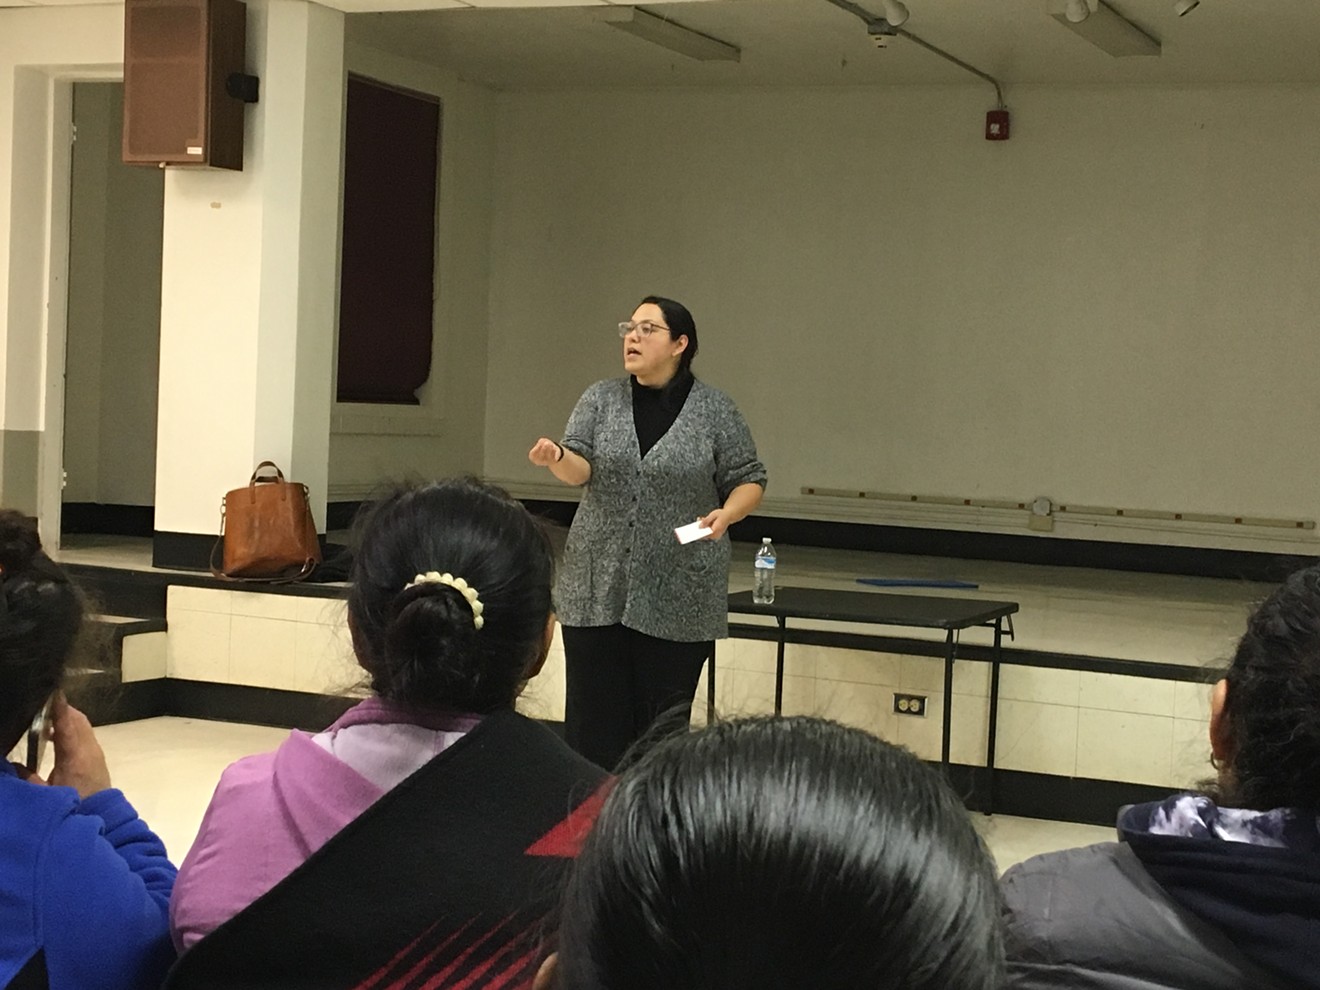 Julie Gonzales giving a "Know Your Rights" presentation on Wednesday, March 1.